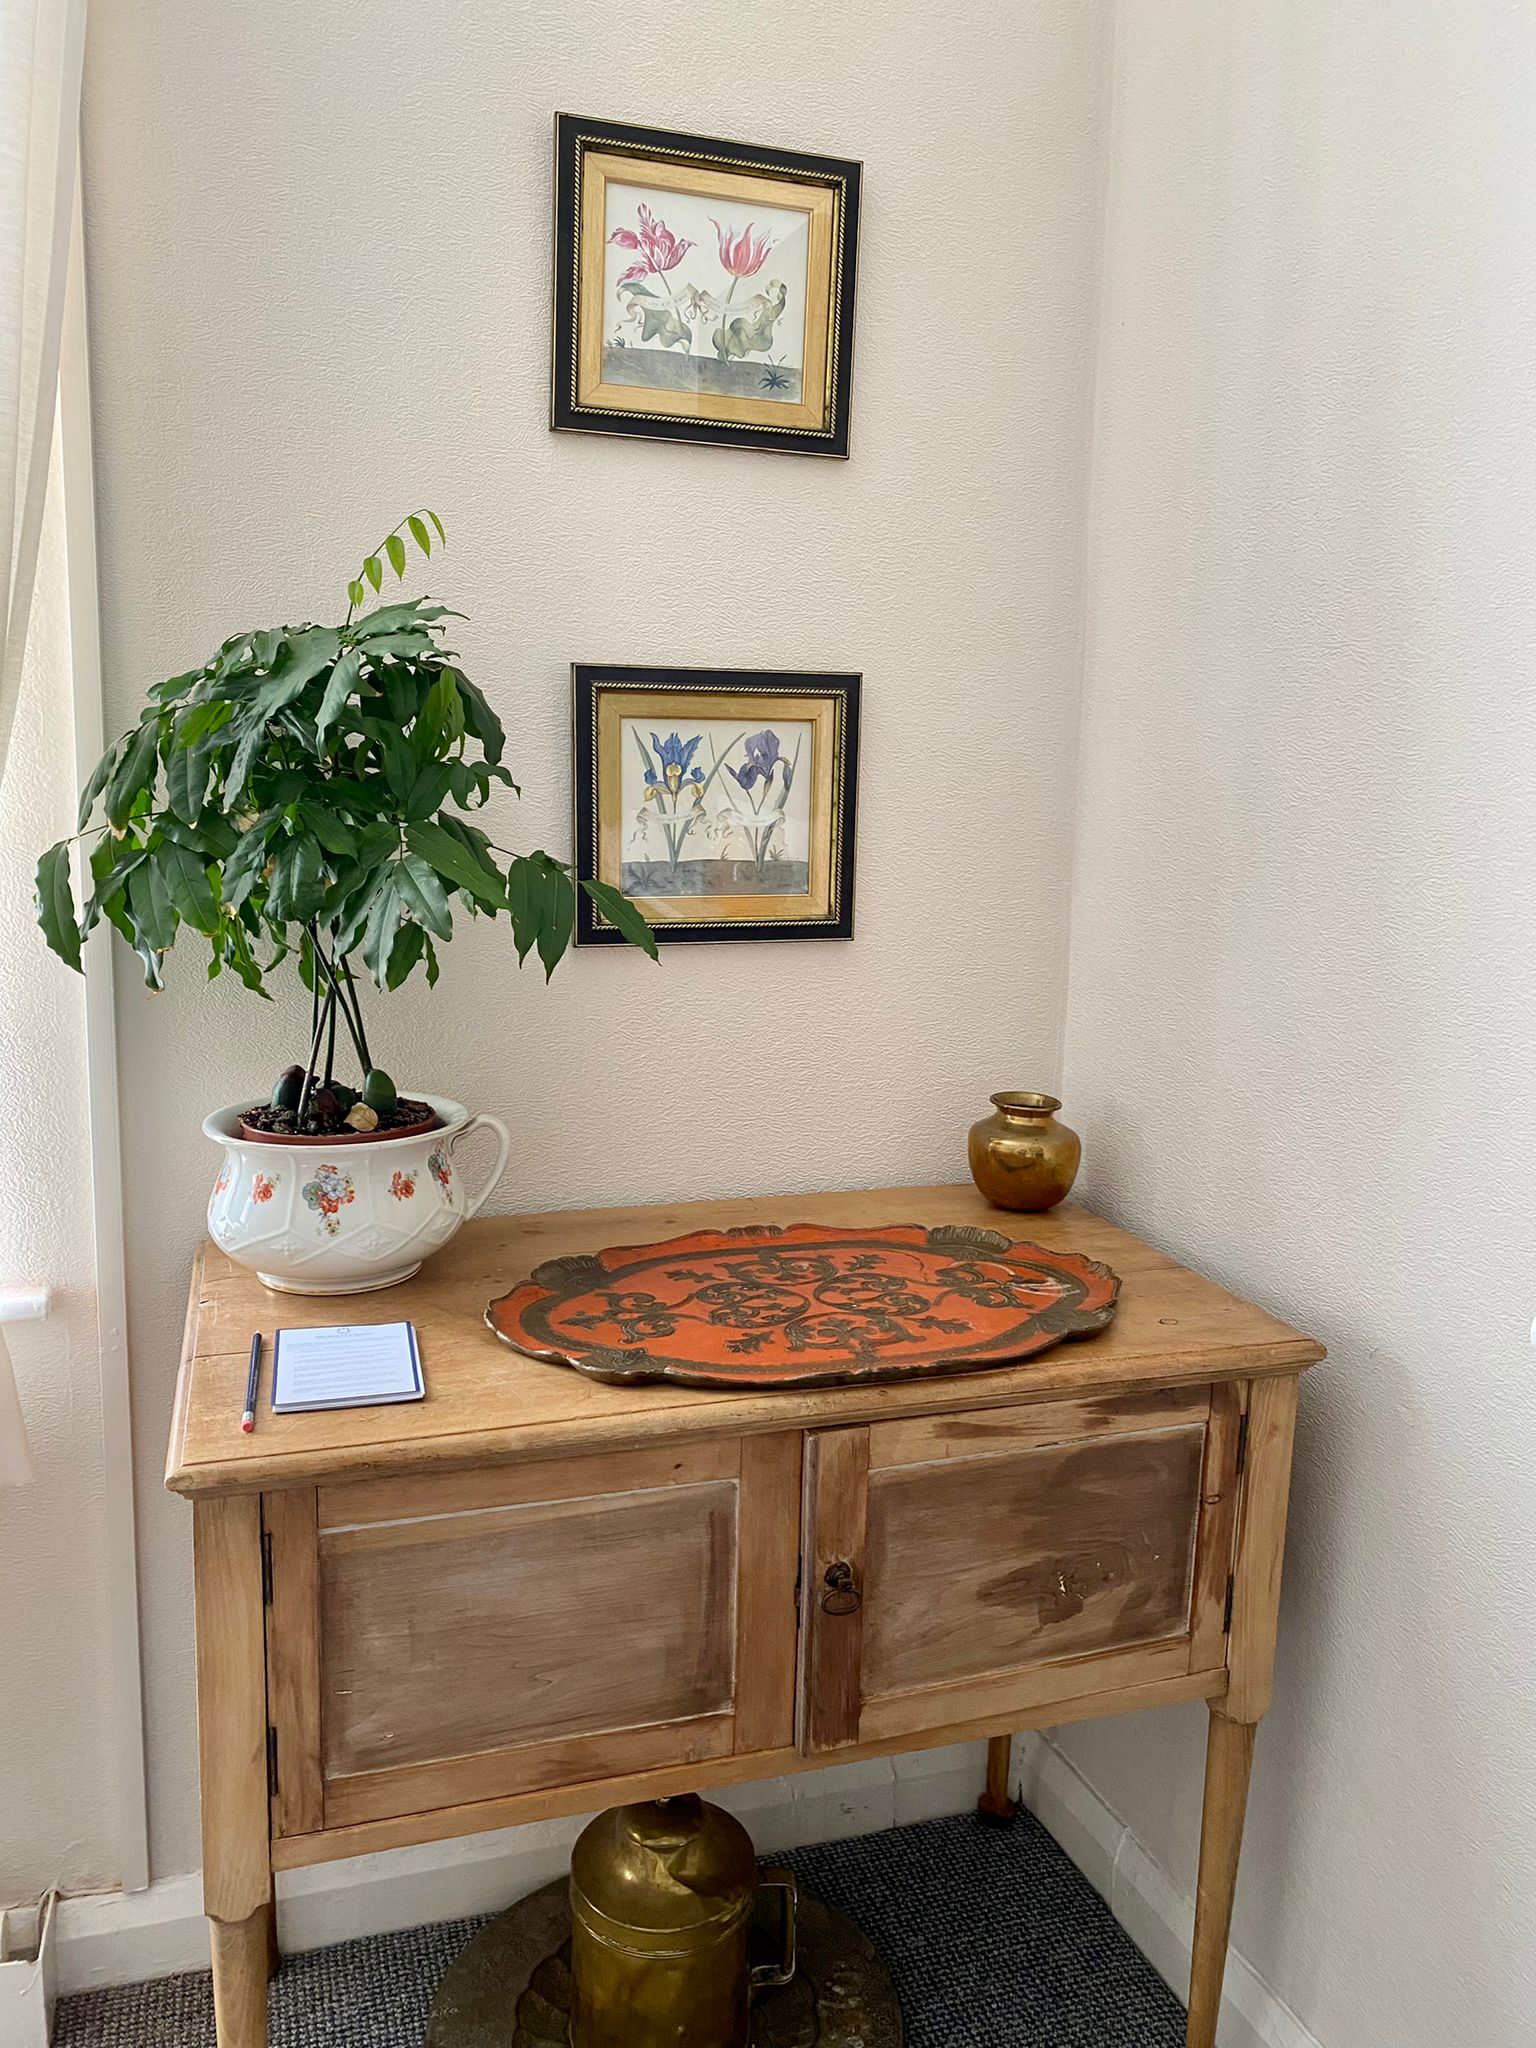 Wooden table with a plant, orange tray and pictures on the wall